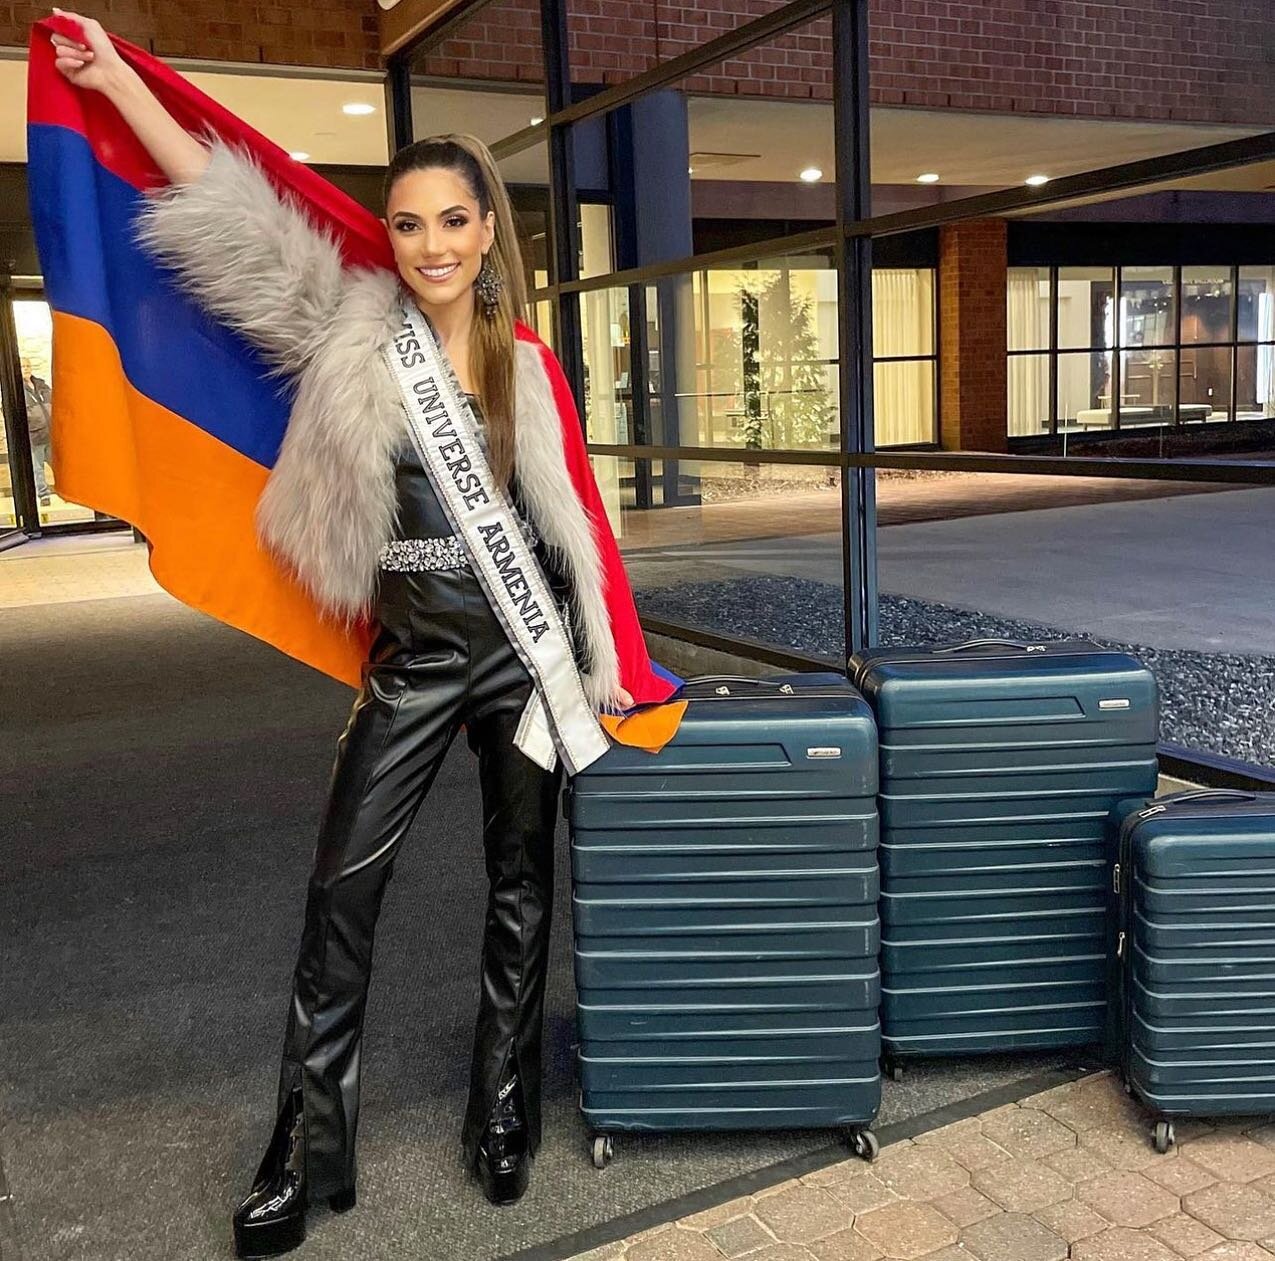 Miss Universe Armenia on her way to win the crown!!! 👑🇦🇲 Glamour Cosmetics is honored to be a sponsor for such a bright, smart, fun, beautiful woman to represent Armenia at the Miss Universe pageant! ❤️ Kristina, we are all so proud of you- you&rs